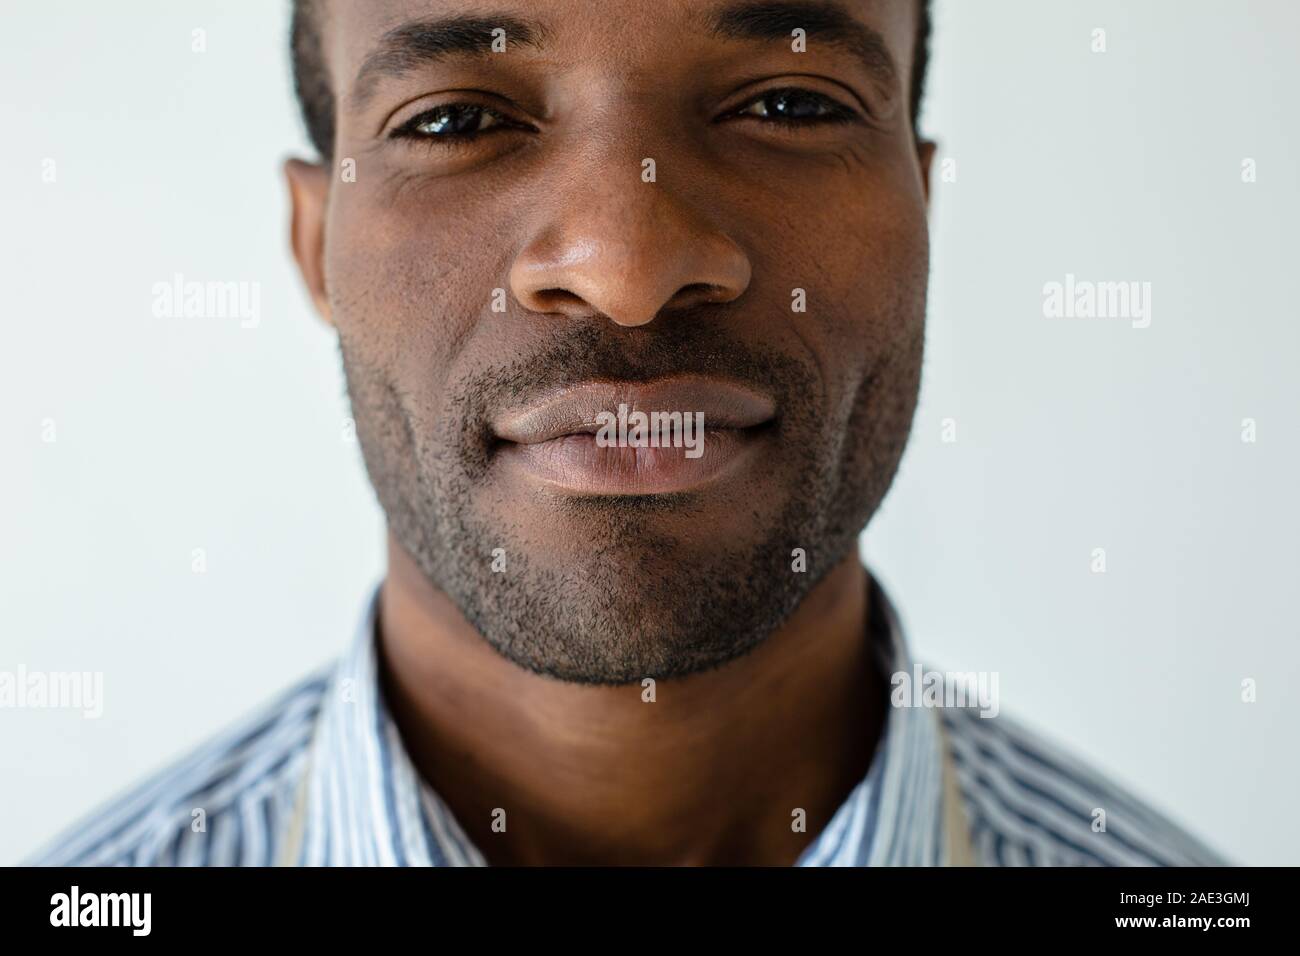 Confident afro americn man standing against white background Stock Photo